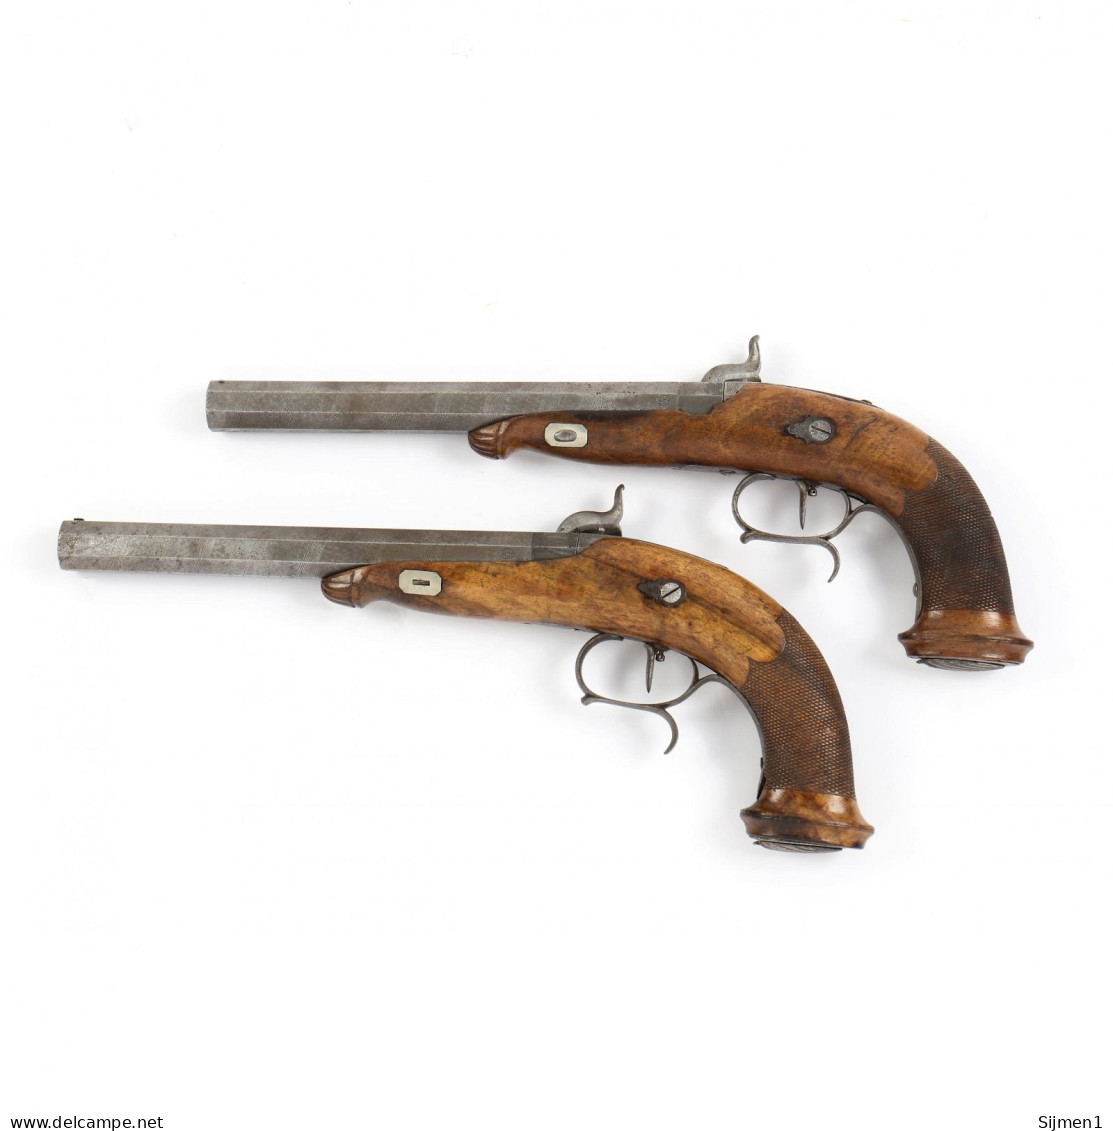 Matched Pair of Belgian Dueling Pistols